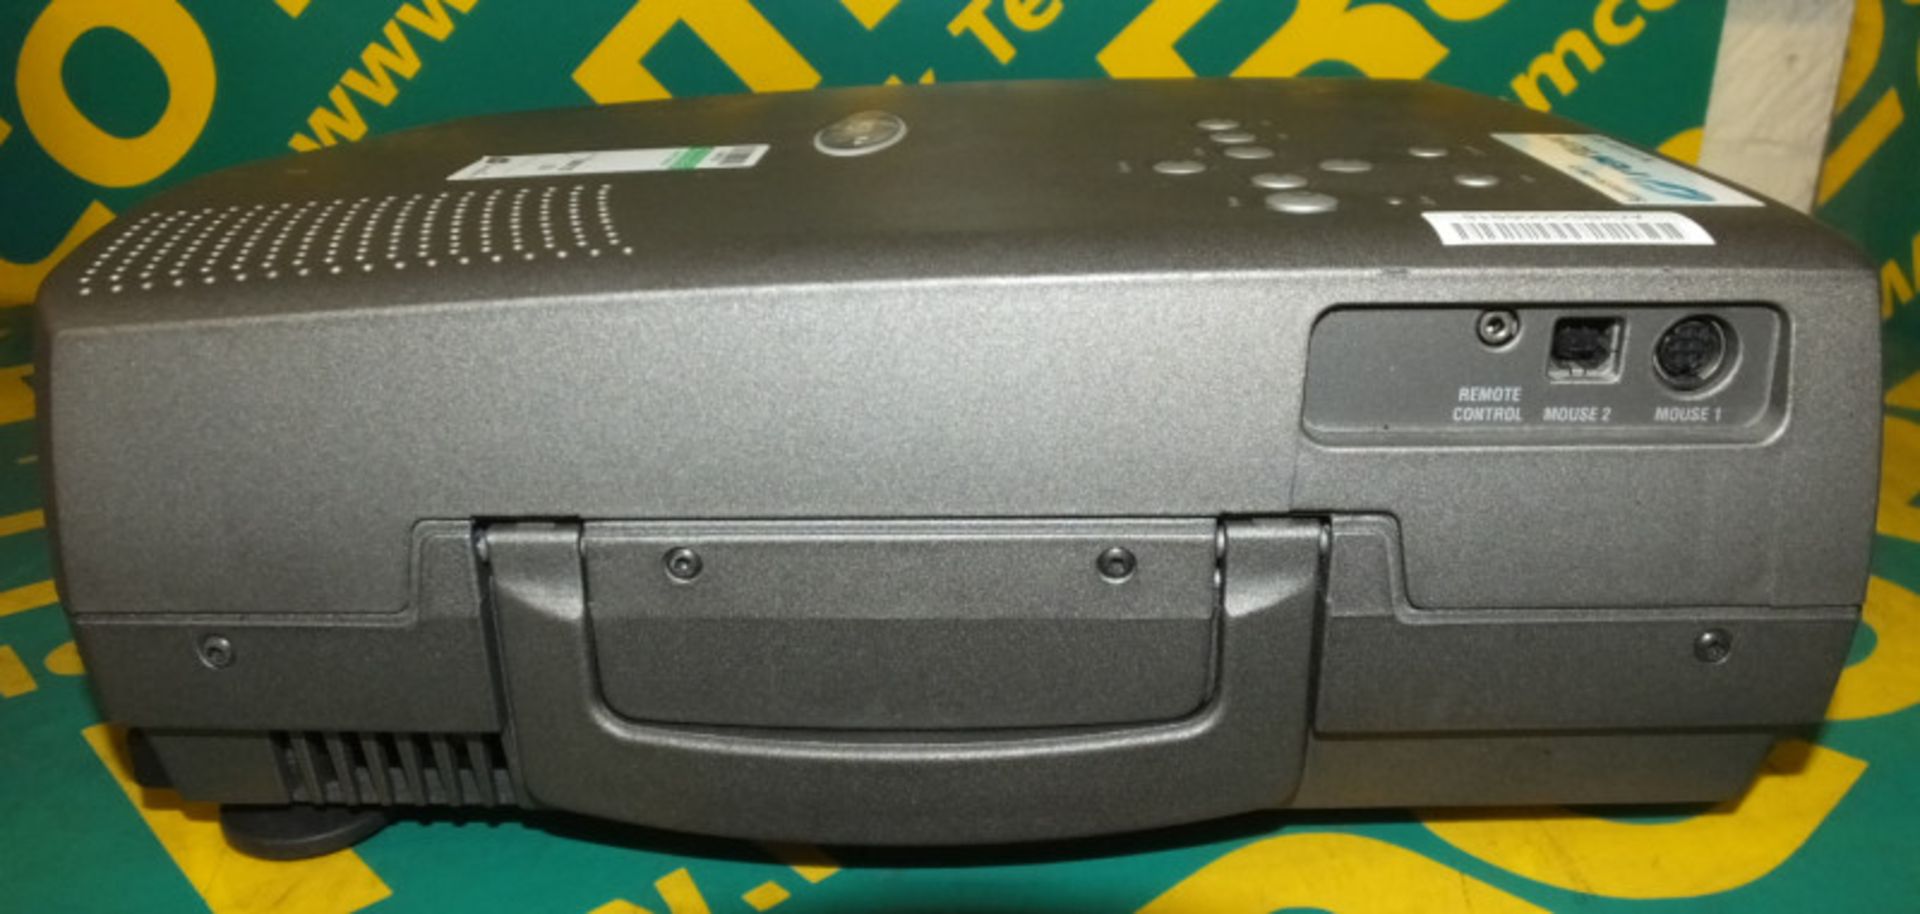 ASK C90 DVI Projector In A Case - Image 4 of 9